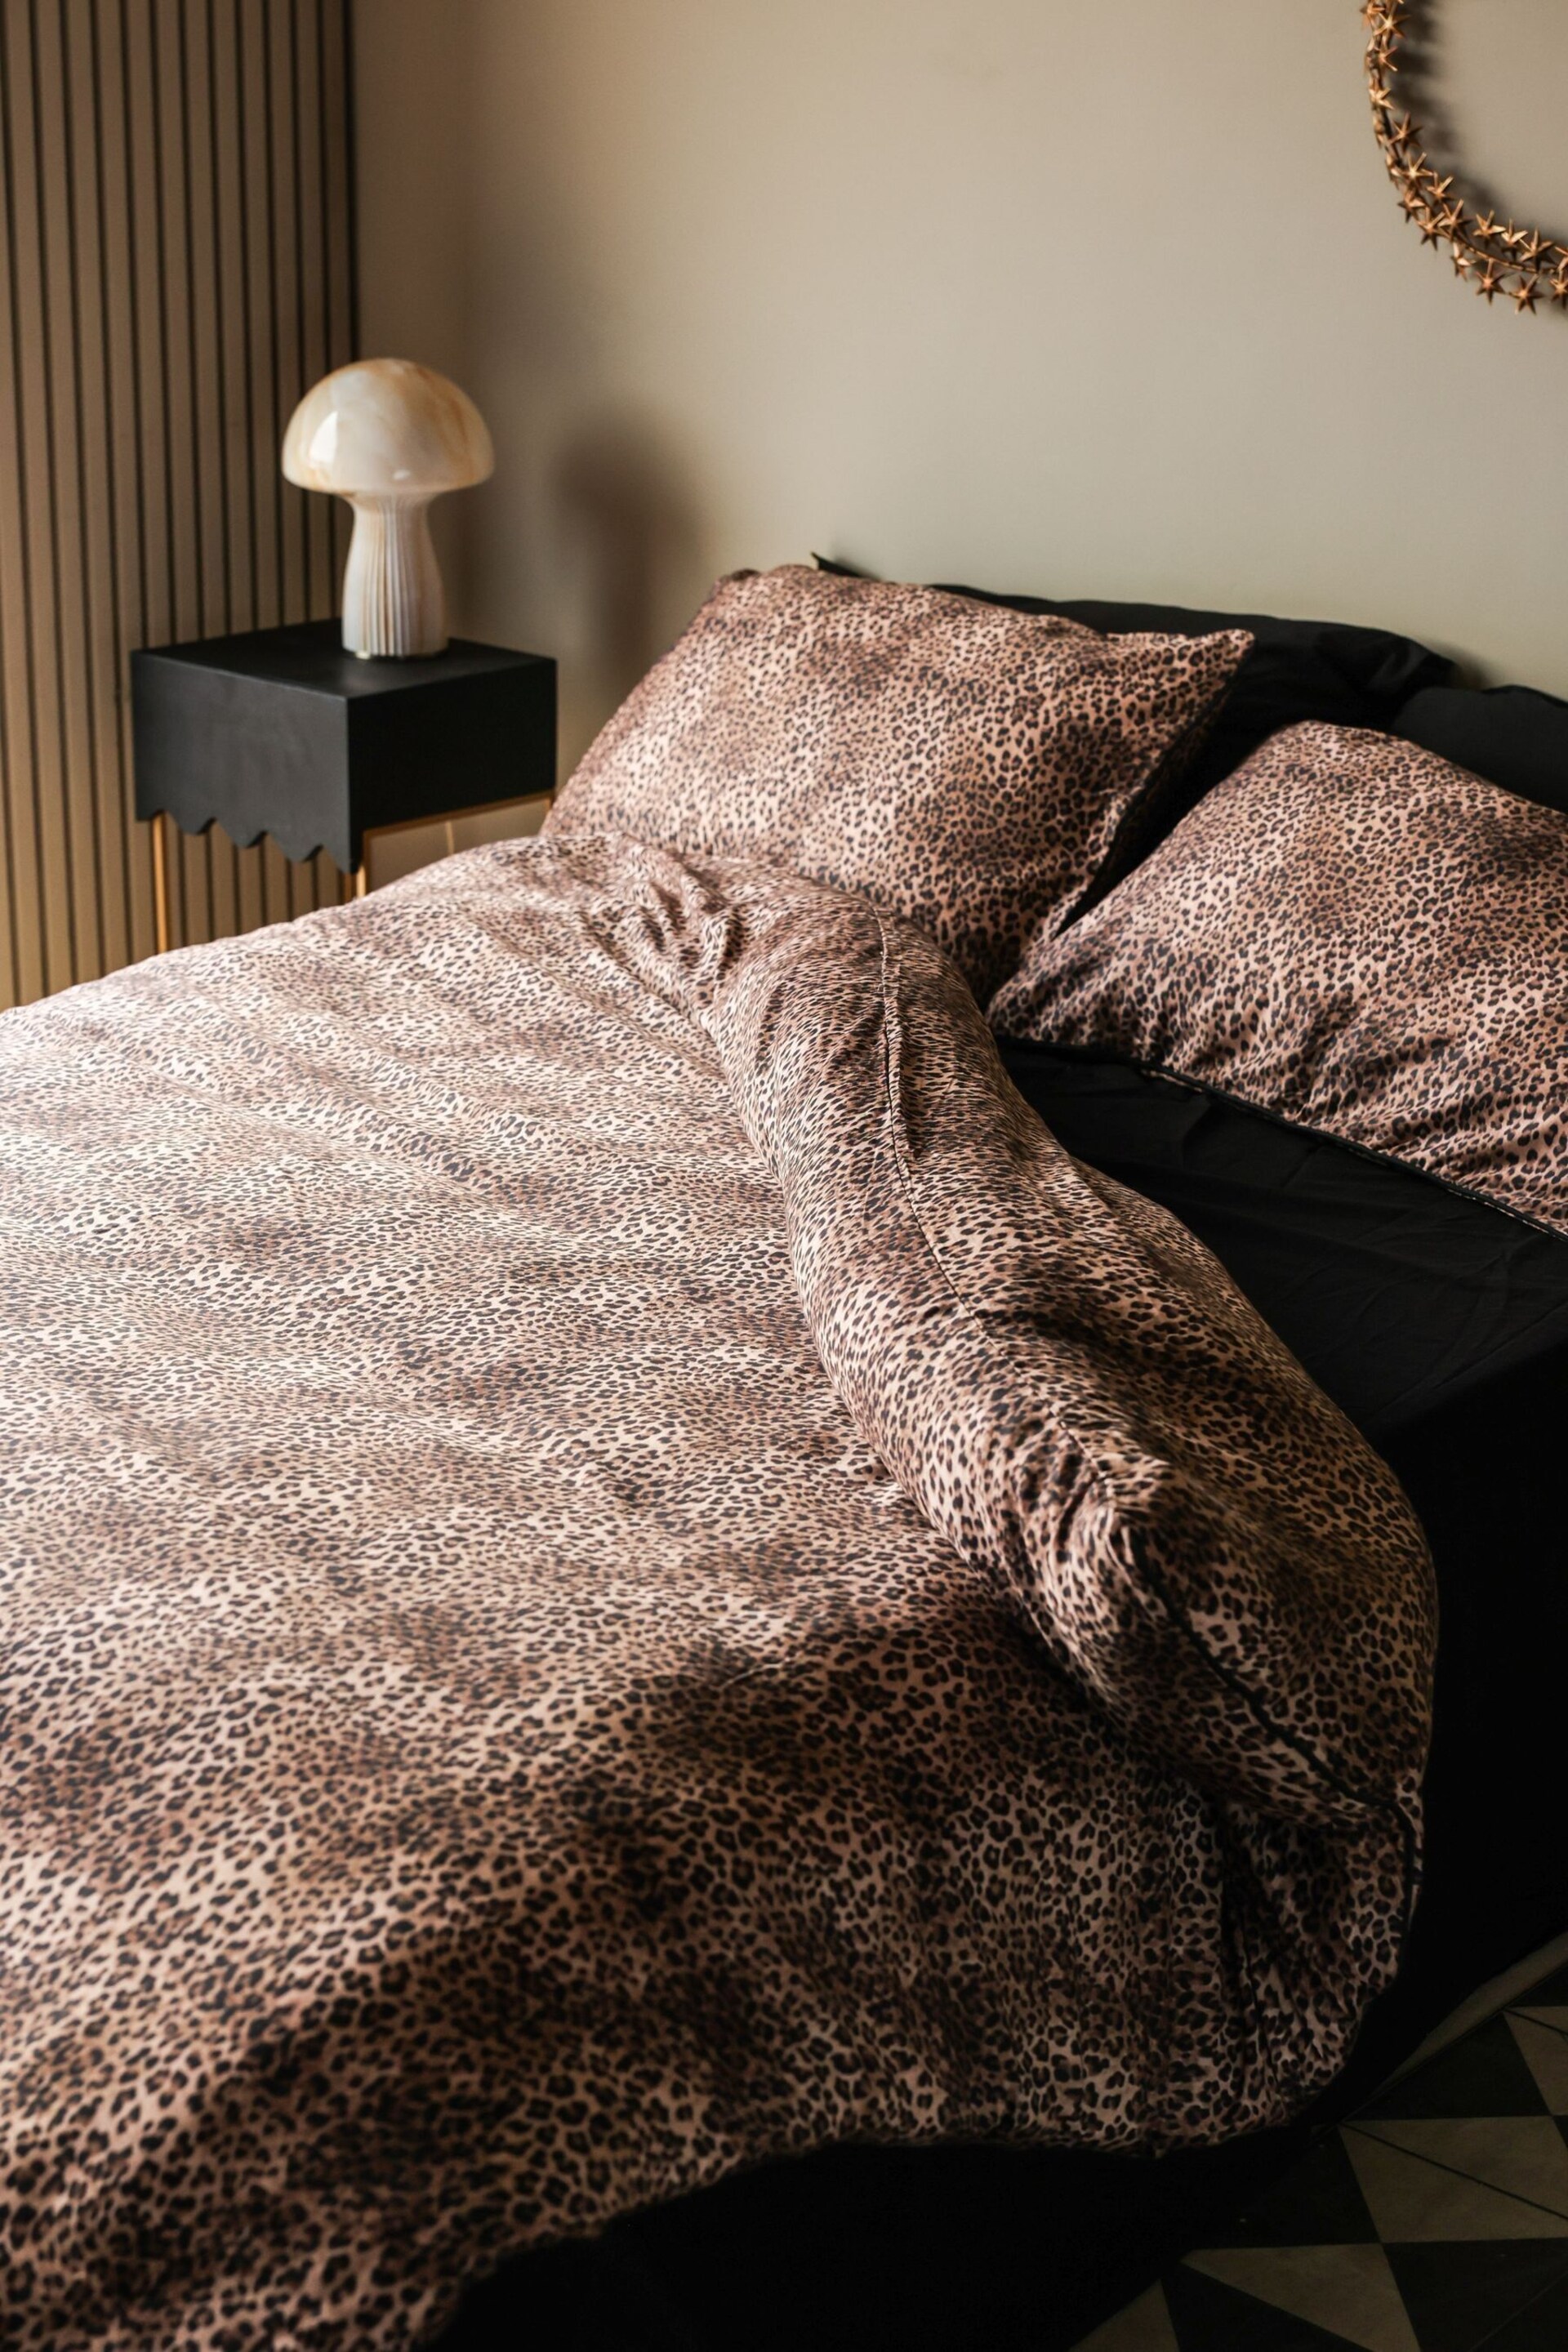 Rockett St George Leopard Love Duvet Cover and Pillowcase Set - Image 1 of 5